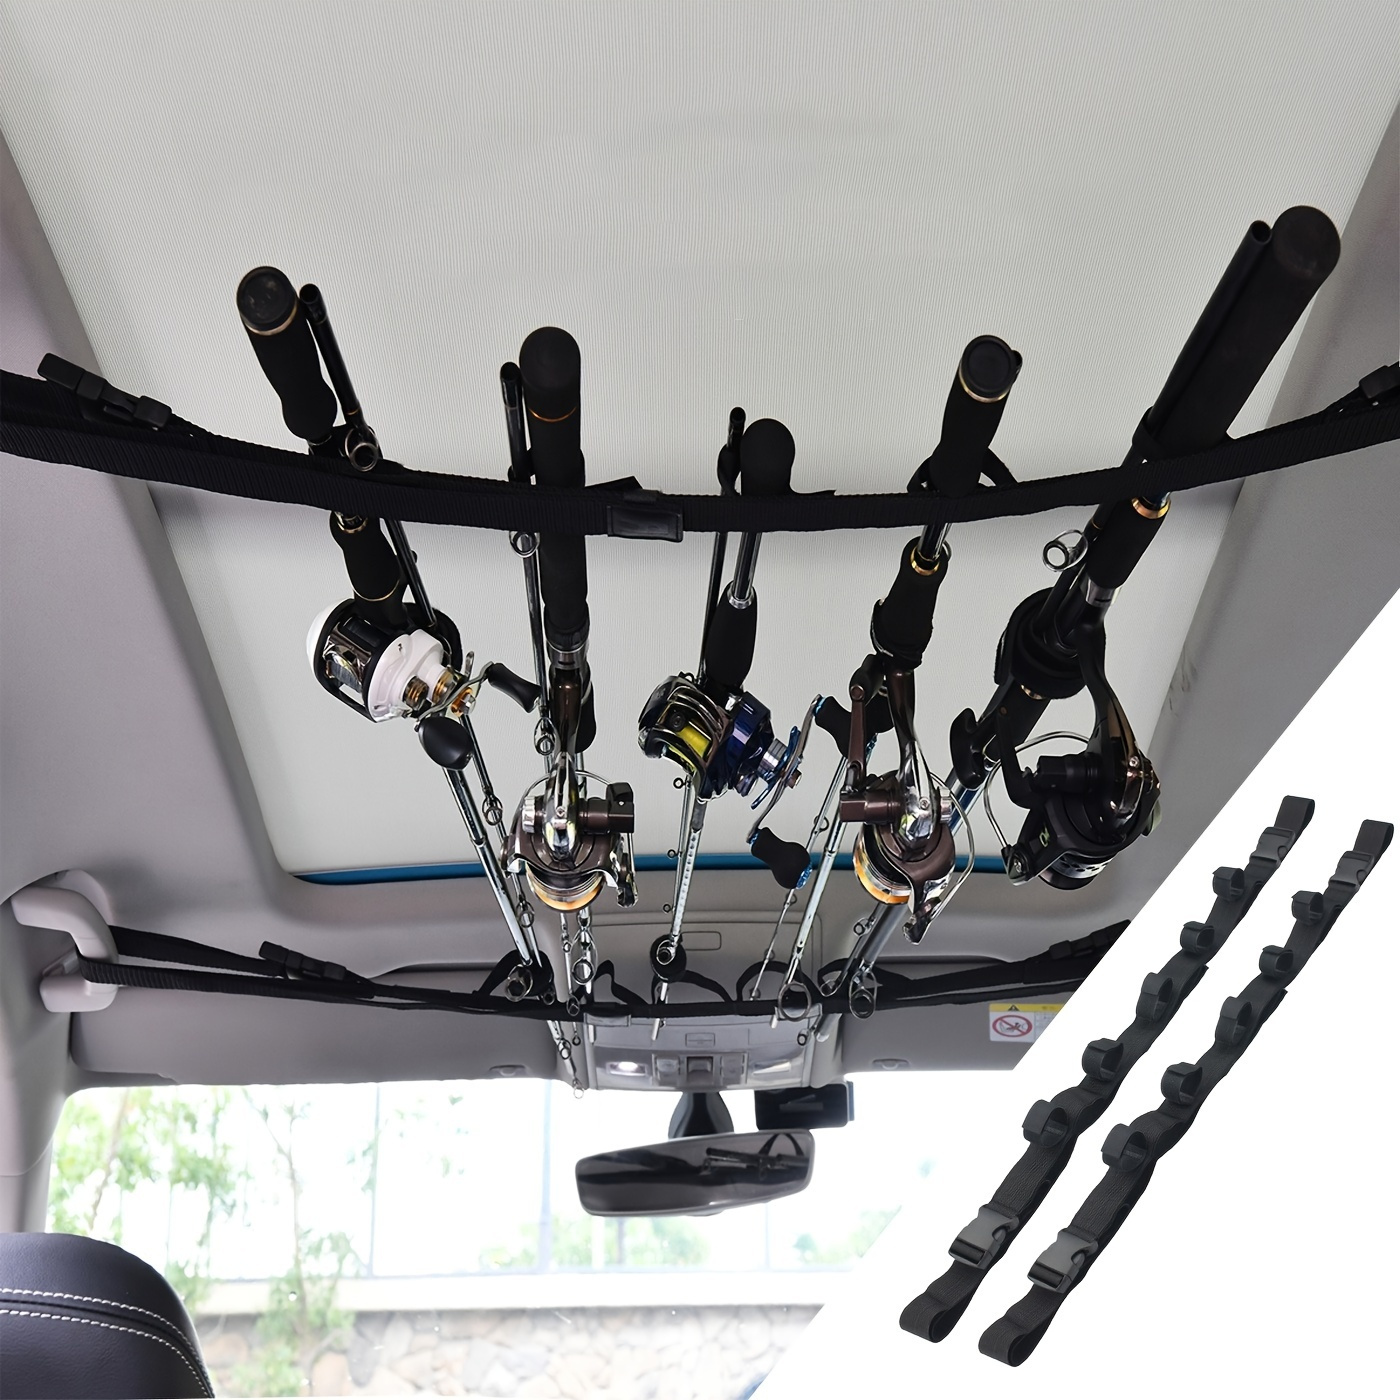 Car Adjustable Fishing Rod Holders with Suction Cups Attach, Fishing Rod  Storage Rack for Car/Truck/SUVs and Vans/Smooth Glass, Holds up to 4  Fishing